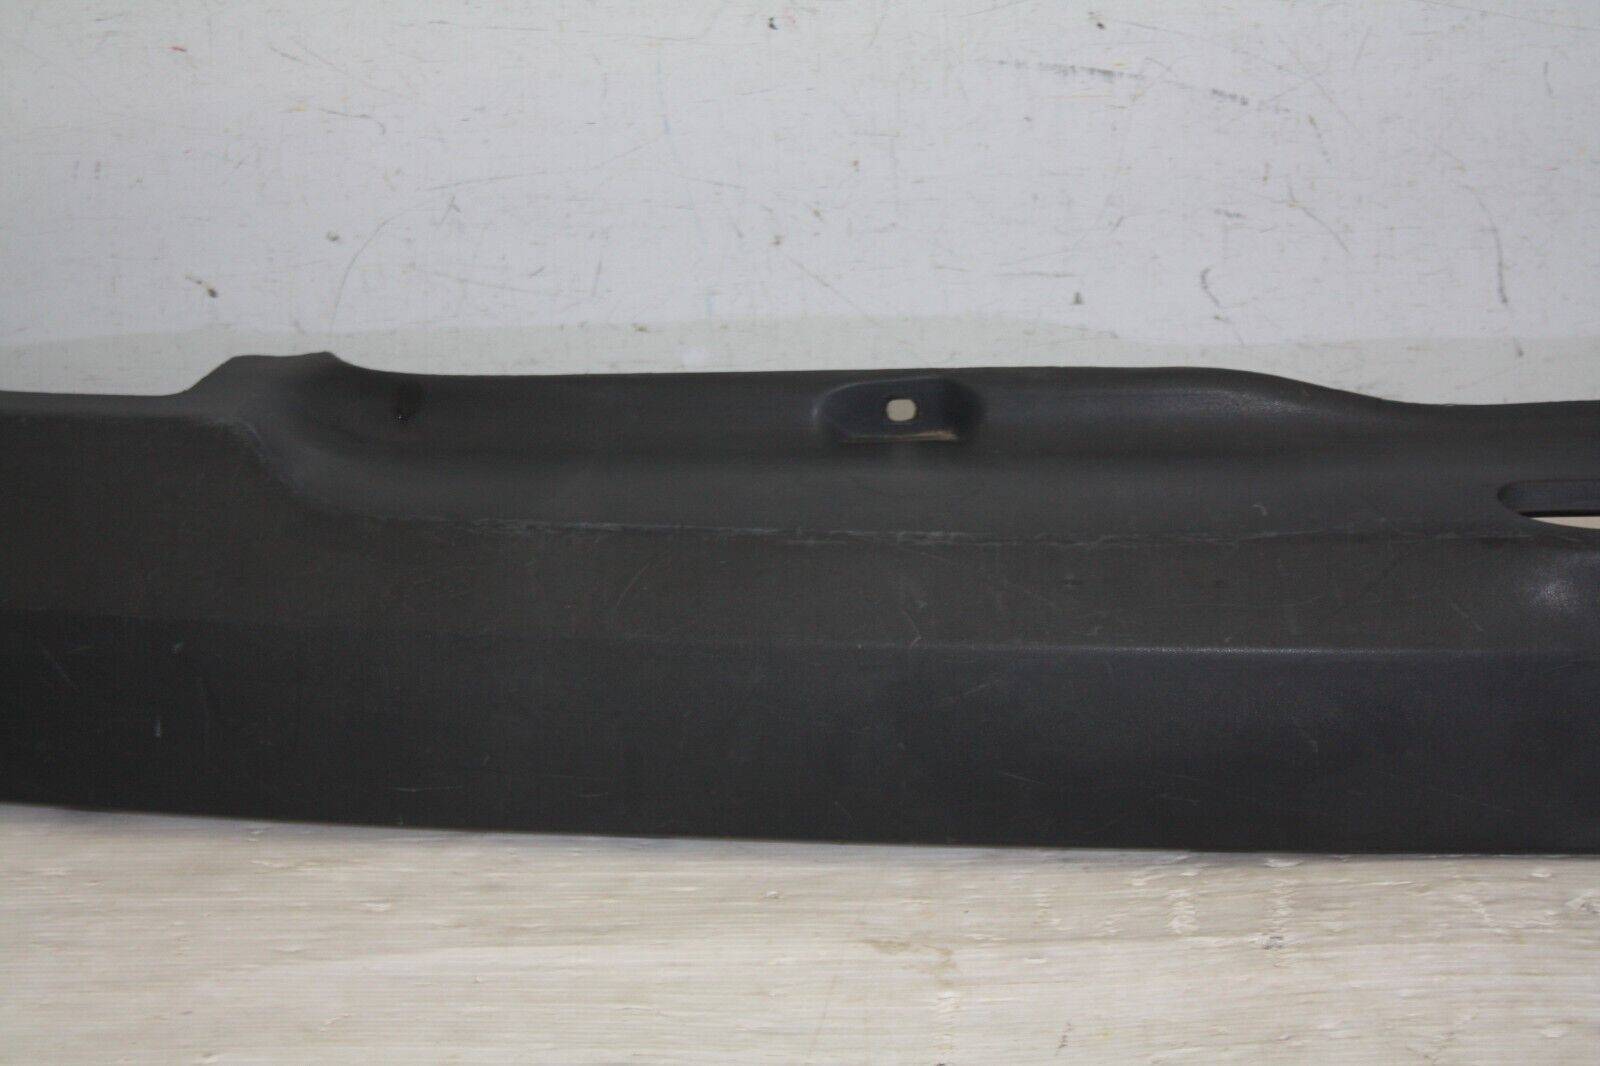 Renault-Clio-Rear-Bumper-Upper-Section-2001-TO-2005-8200083217-Genuine-176093485781-5